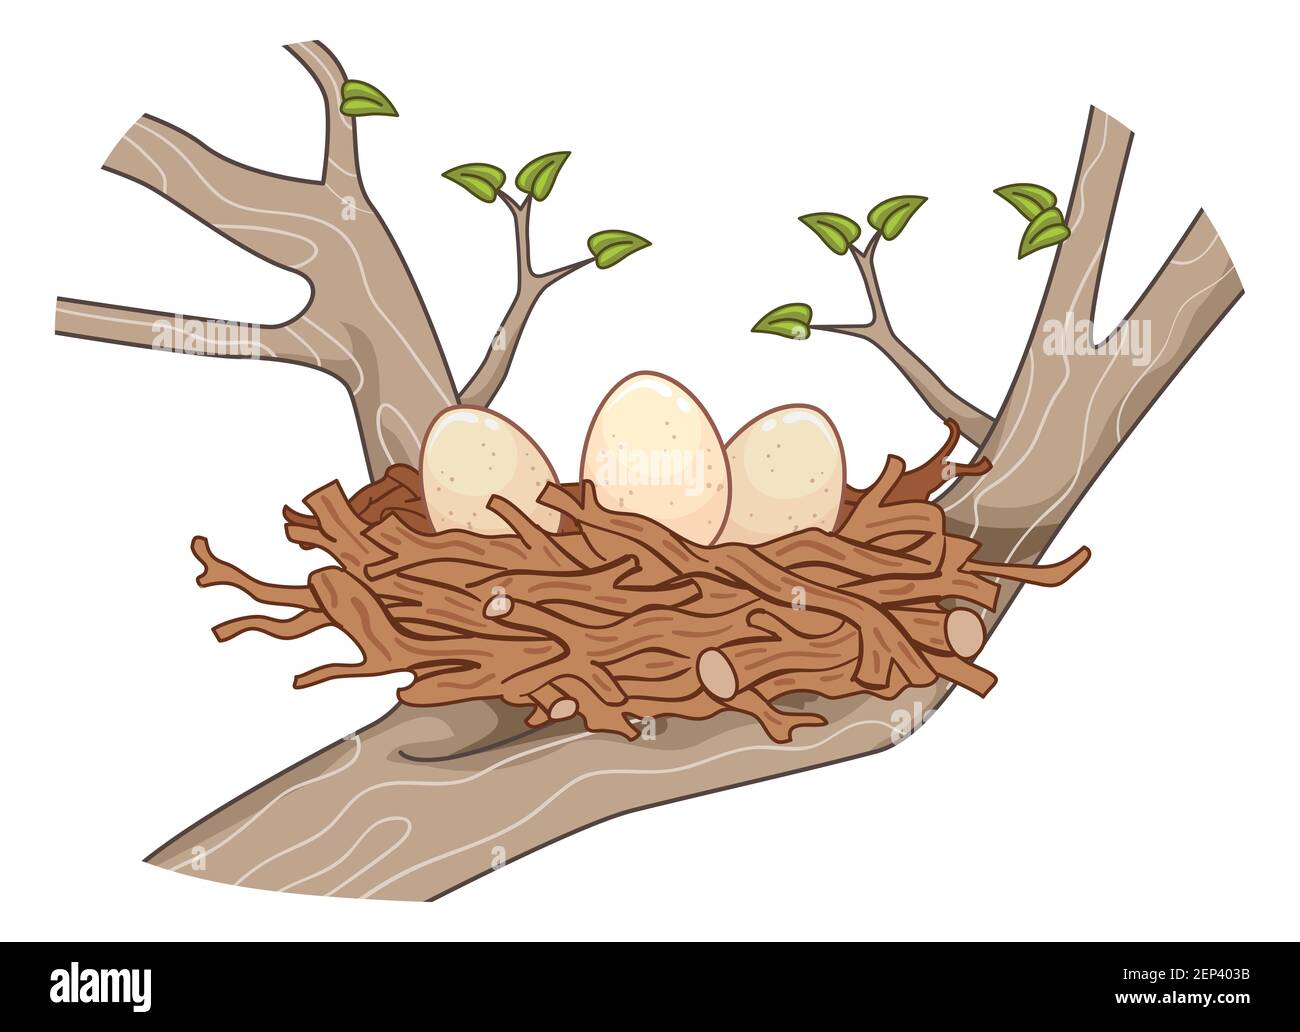 Illustration of Eggs on Nests Made of Sticks on a Tree Stock Photo